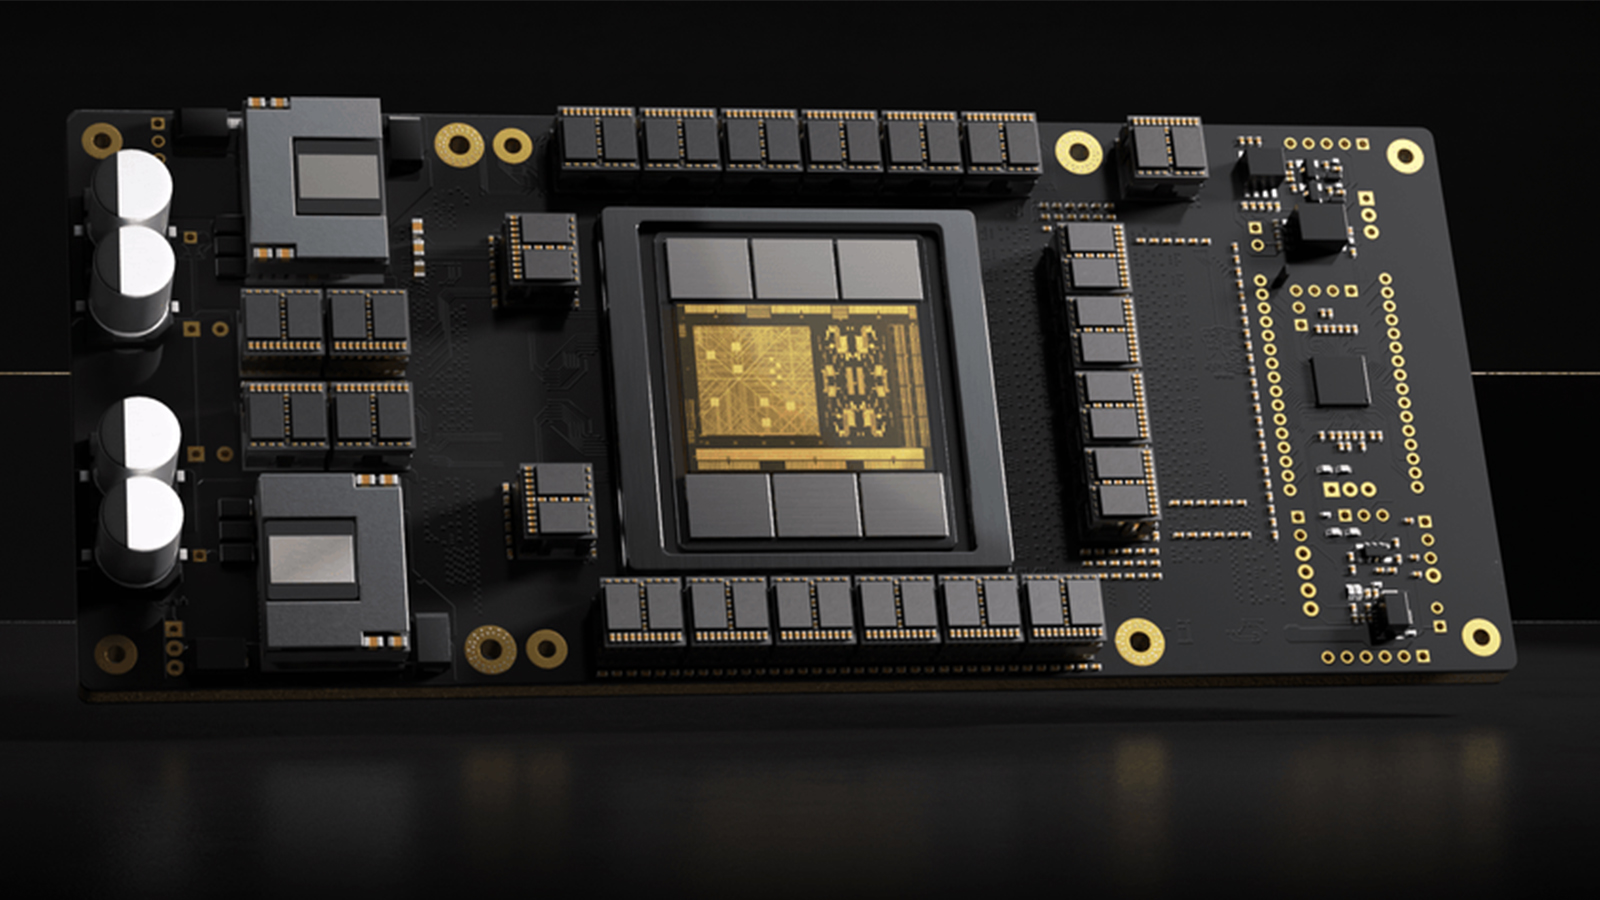 Sohu AI chip claimed to run models 20x faster and cheaper than Nvidia H100 GPUs